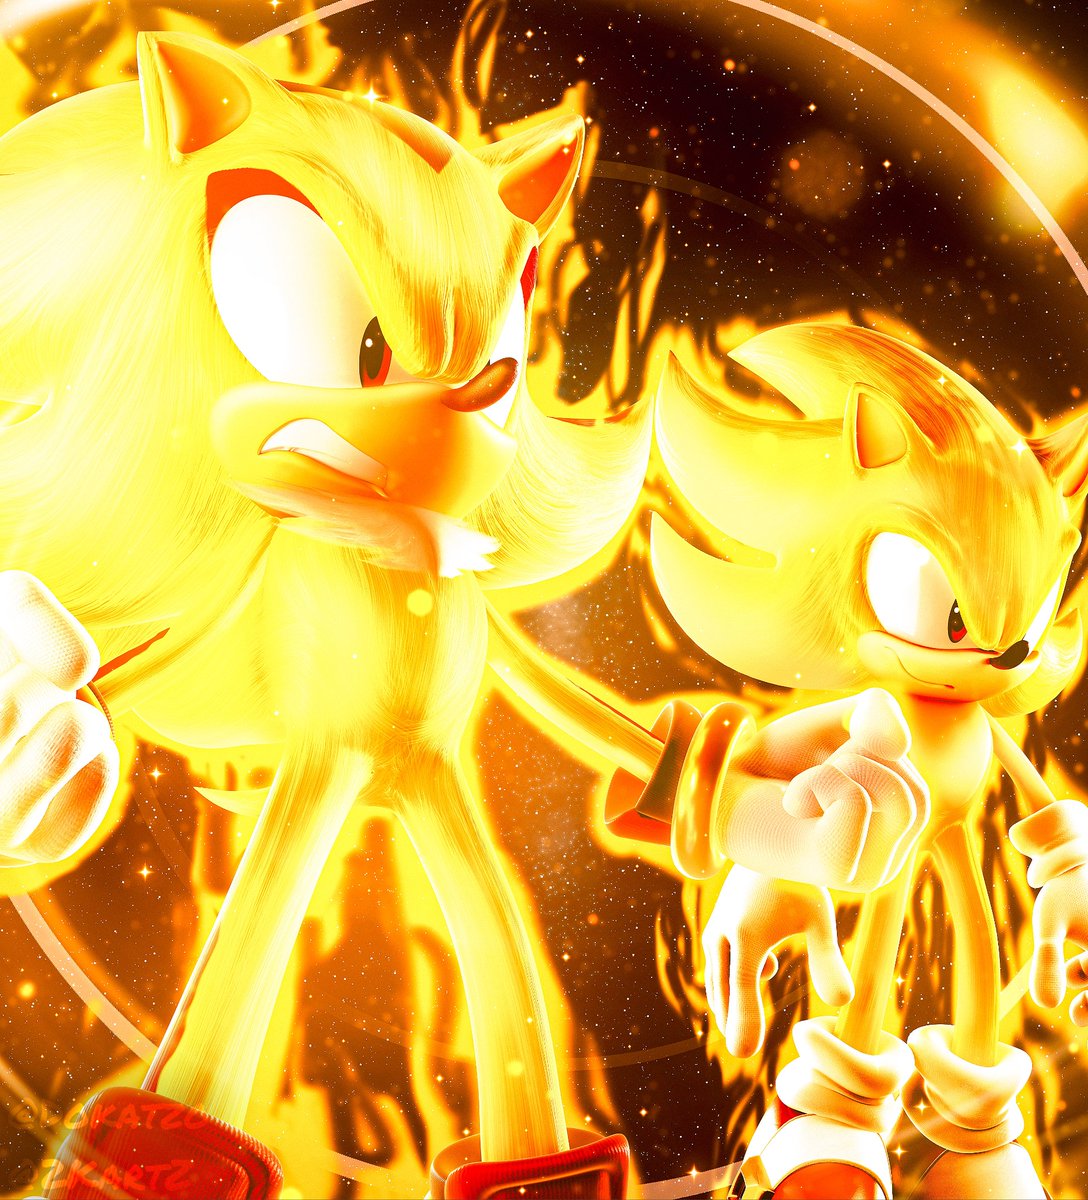 Live And Learn 🔥 Render by me 📸 photoshopped by @2KartZ ✨ #SonicTheHedgehog #b3d